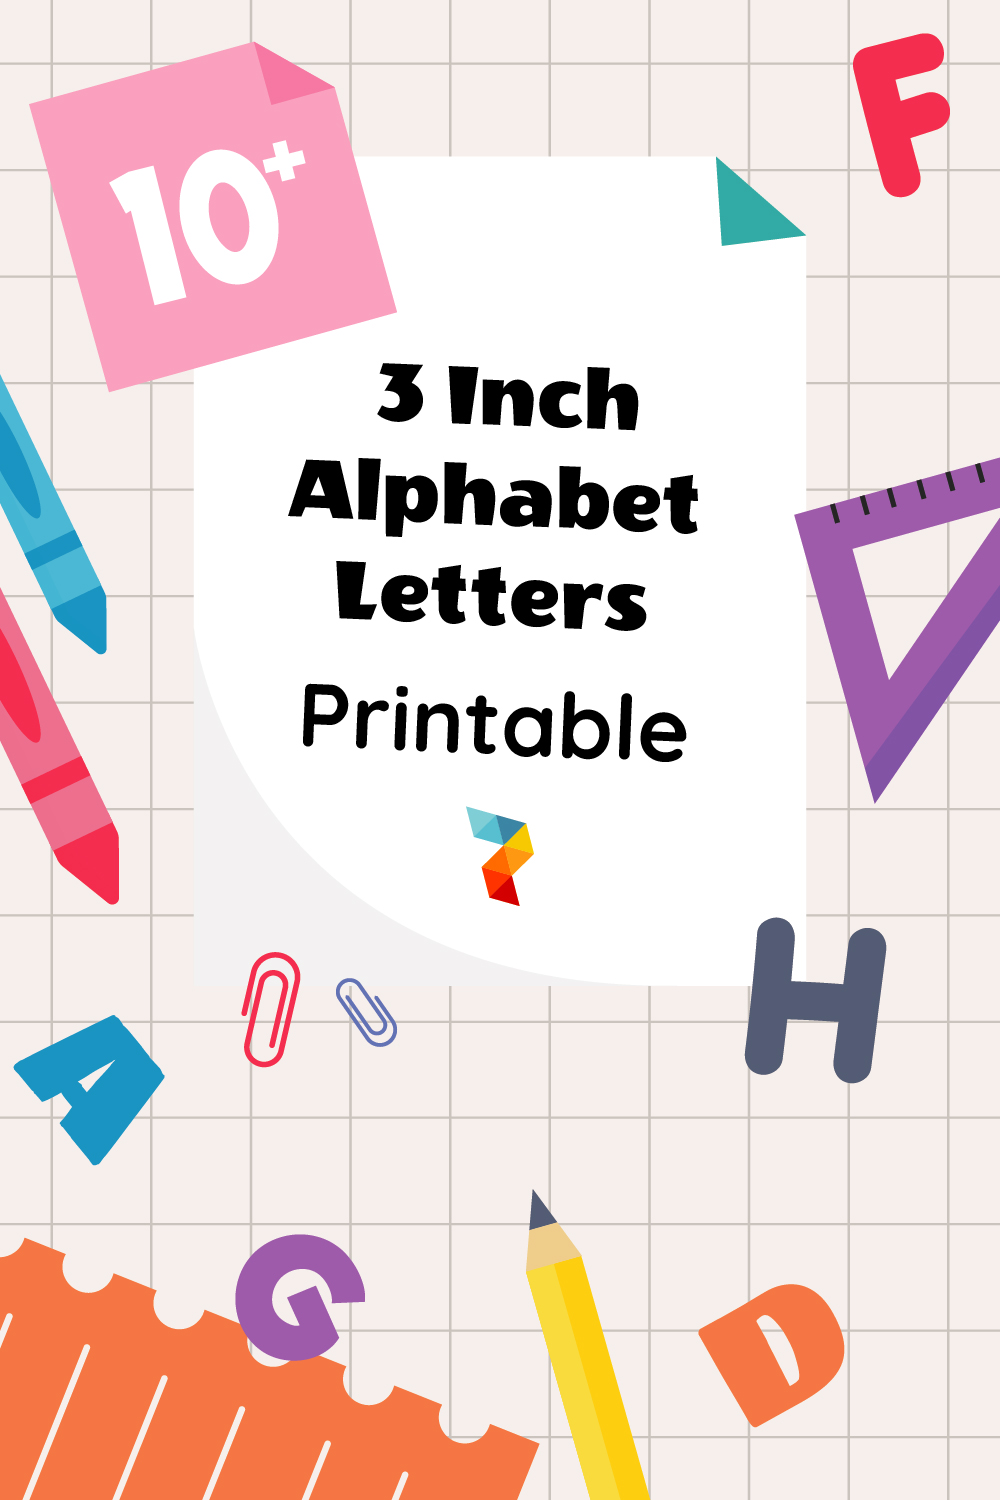 3 Inch Alphabet Letters